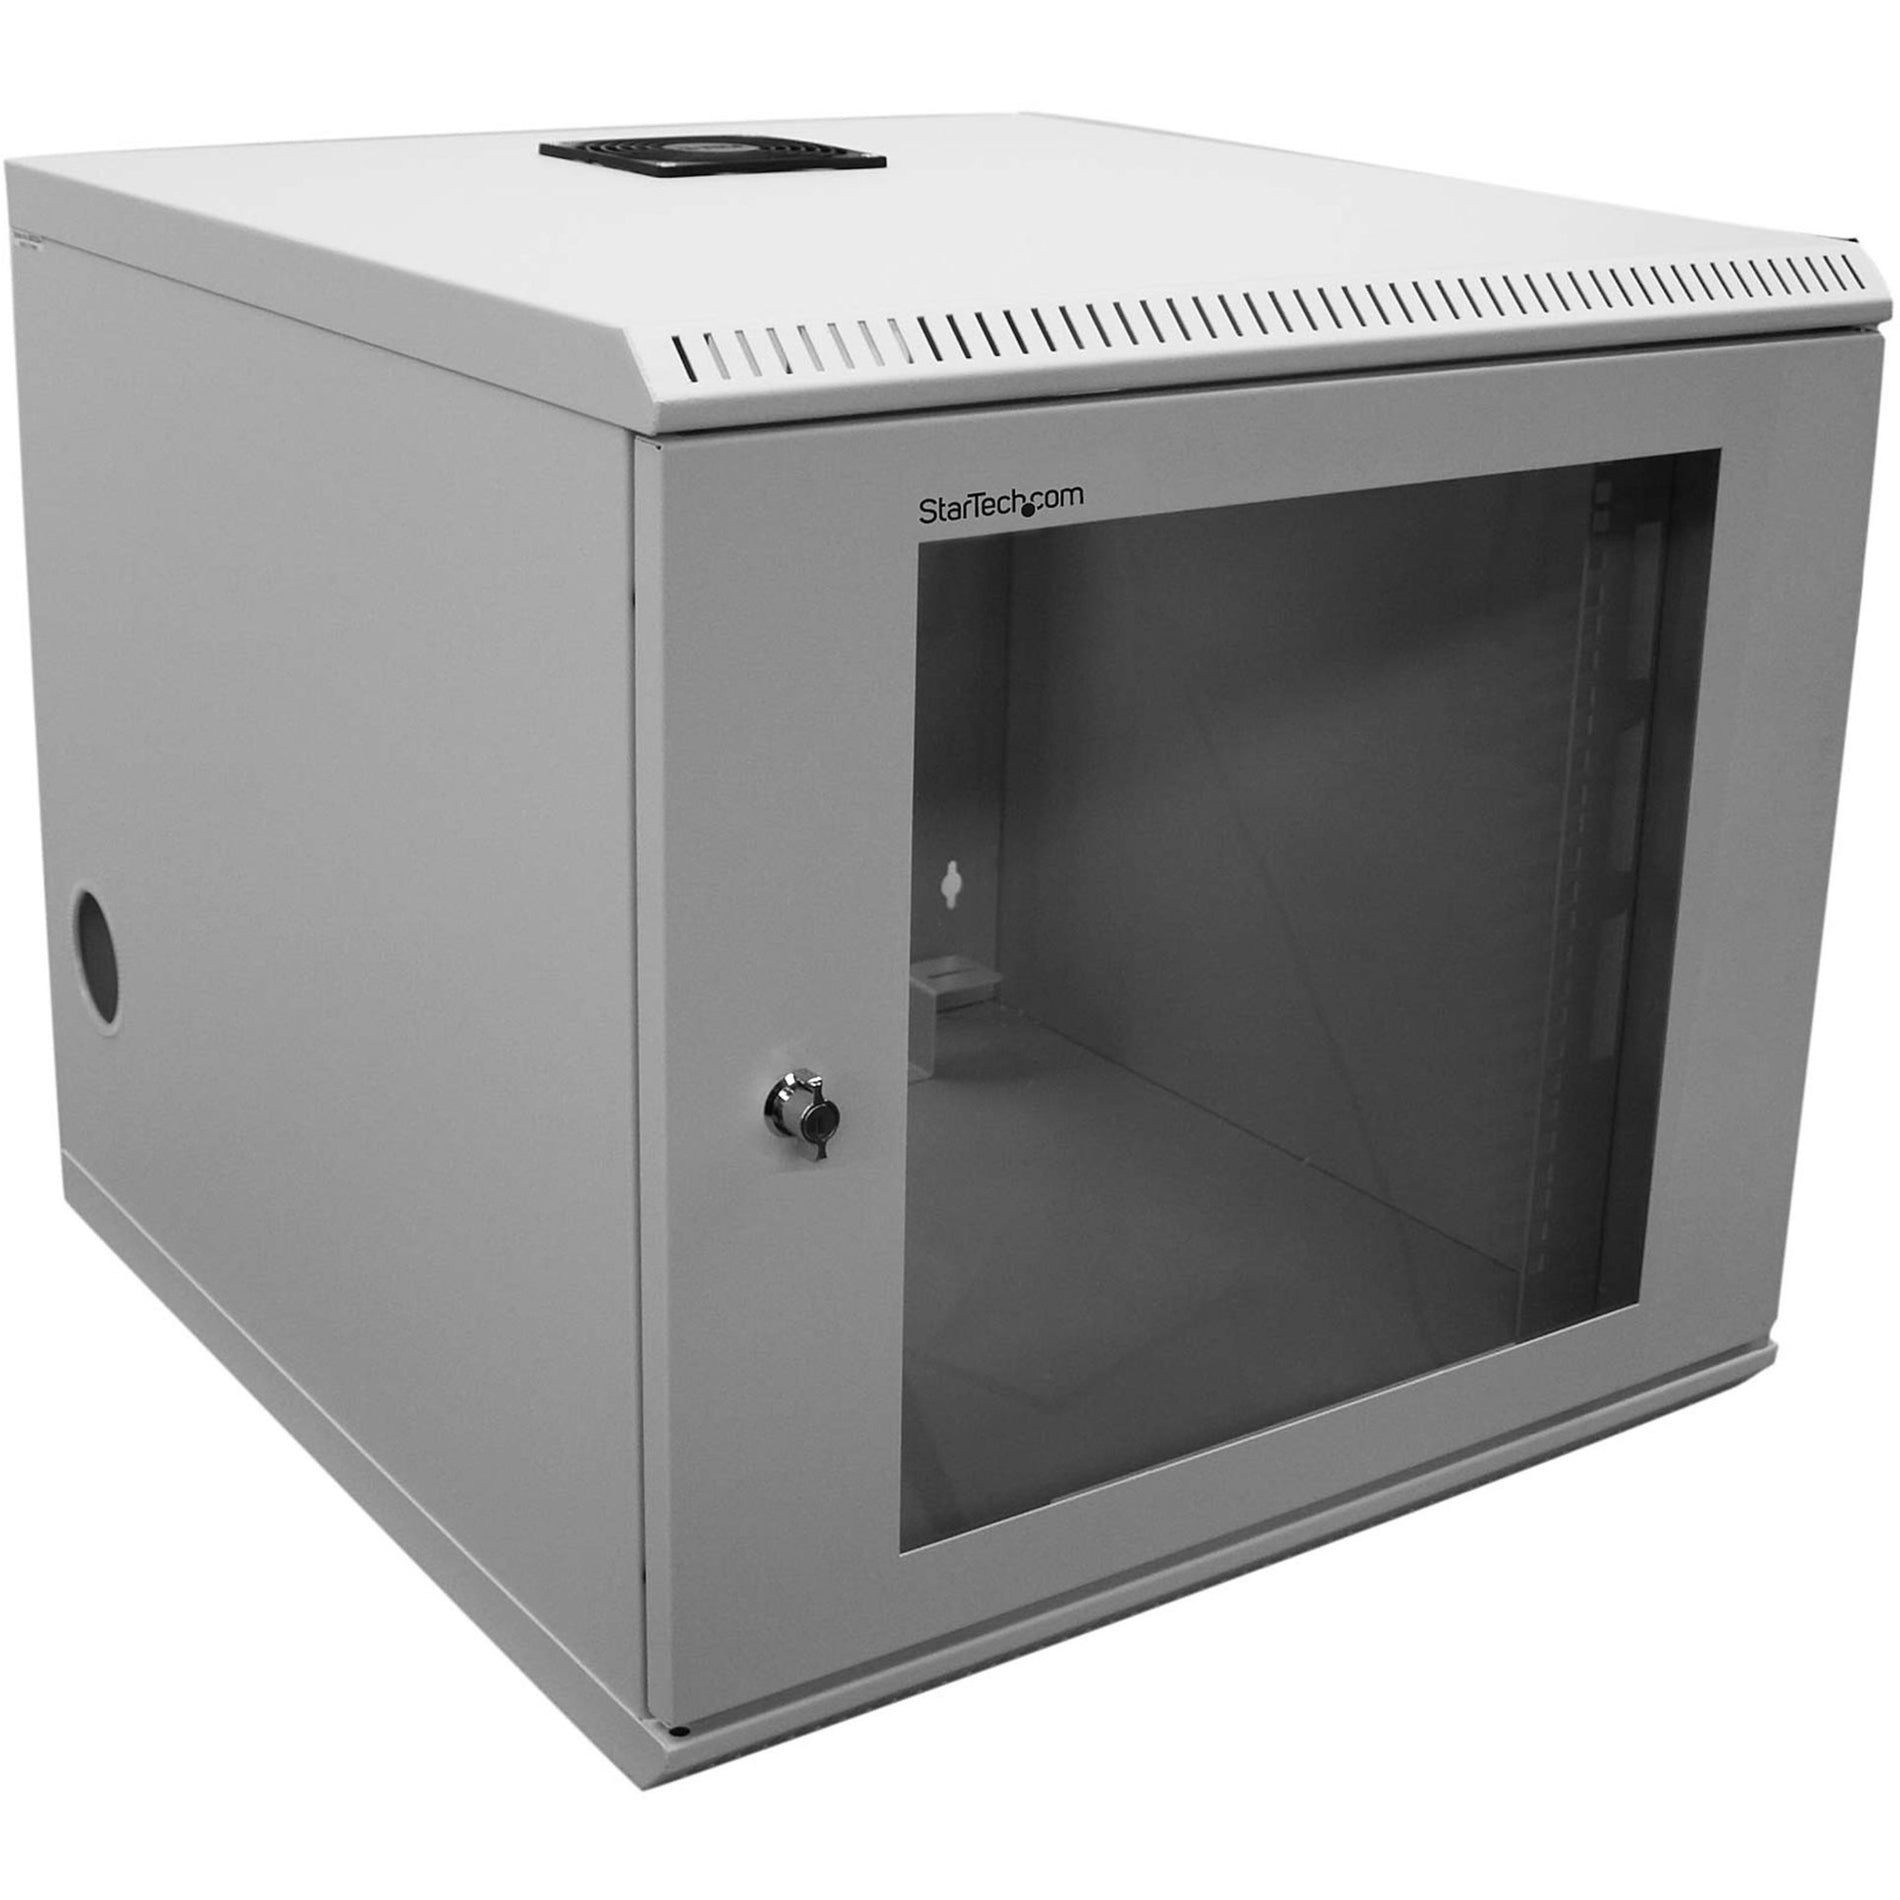 StarTech.com CAB1019WALL 10U 19" Wall Mounted Server Rack Cabinet, Fully Assembled, Removable Front Door, Adjustable Mounting Rails